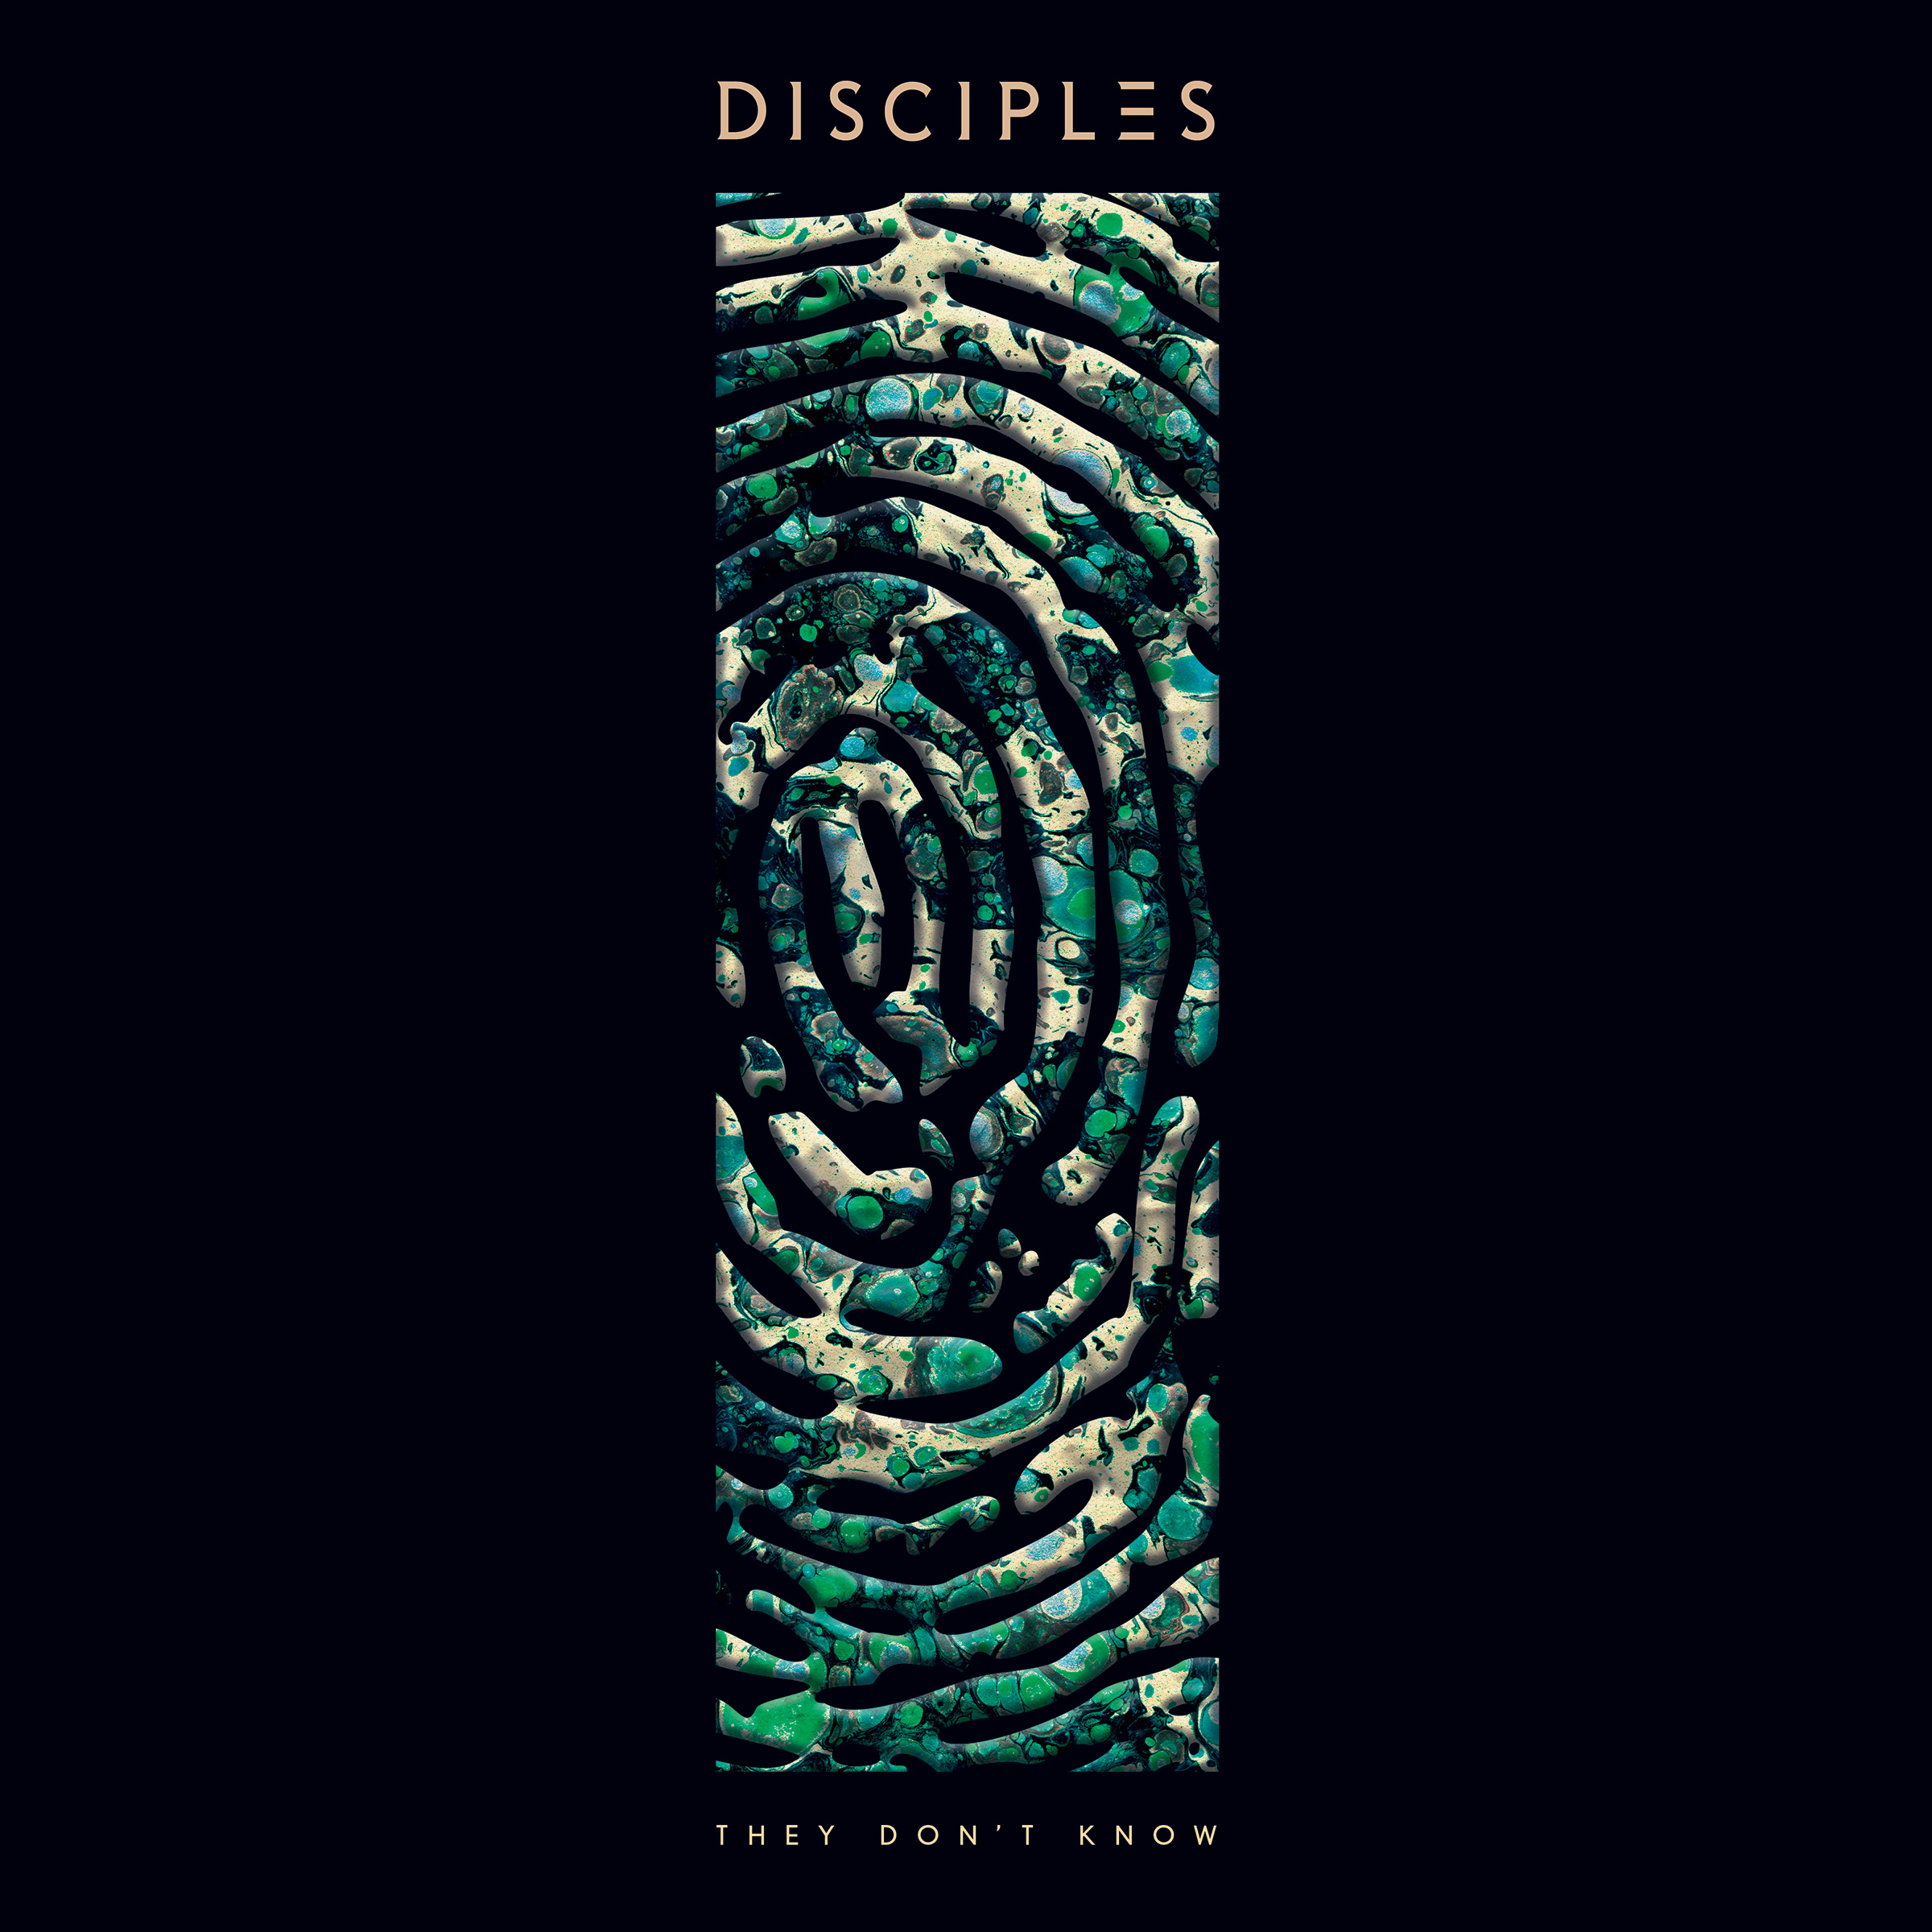 Stiahnuť ▼ Disciples - They Don't Know